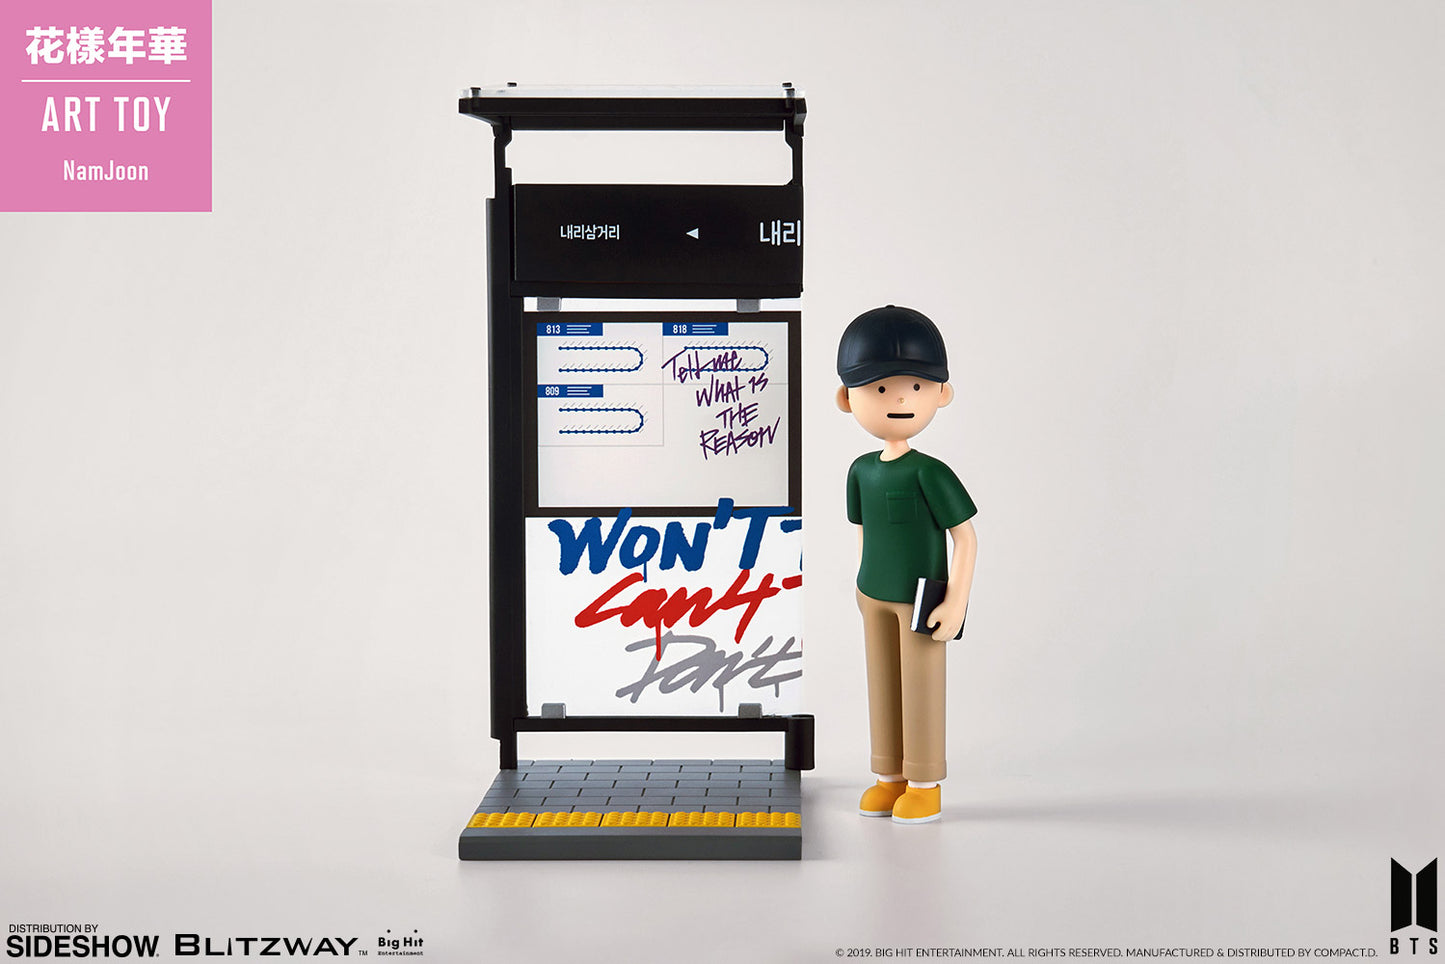 NamJoon (RM) Designer Toy by Blitzway